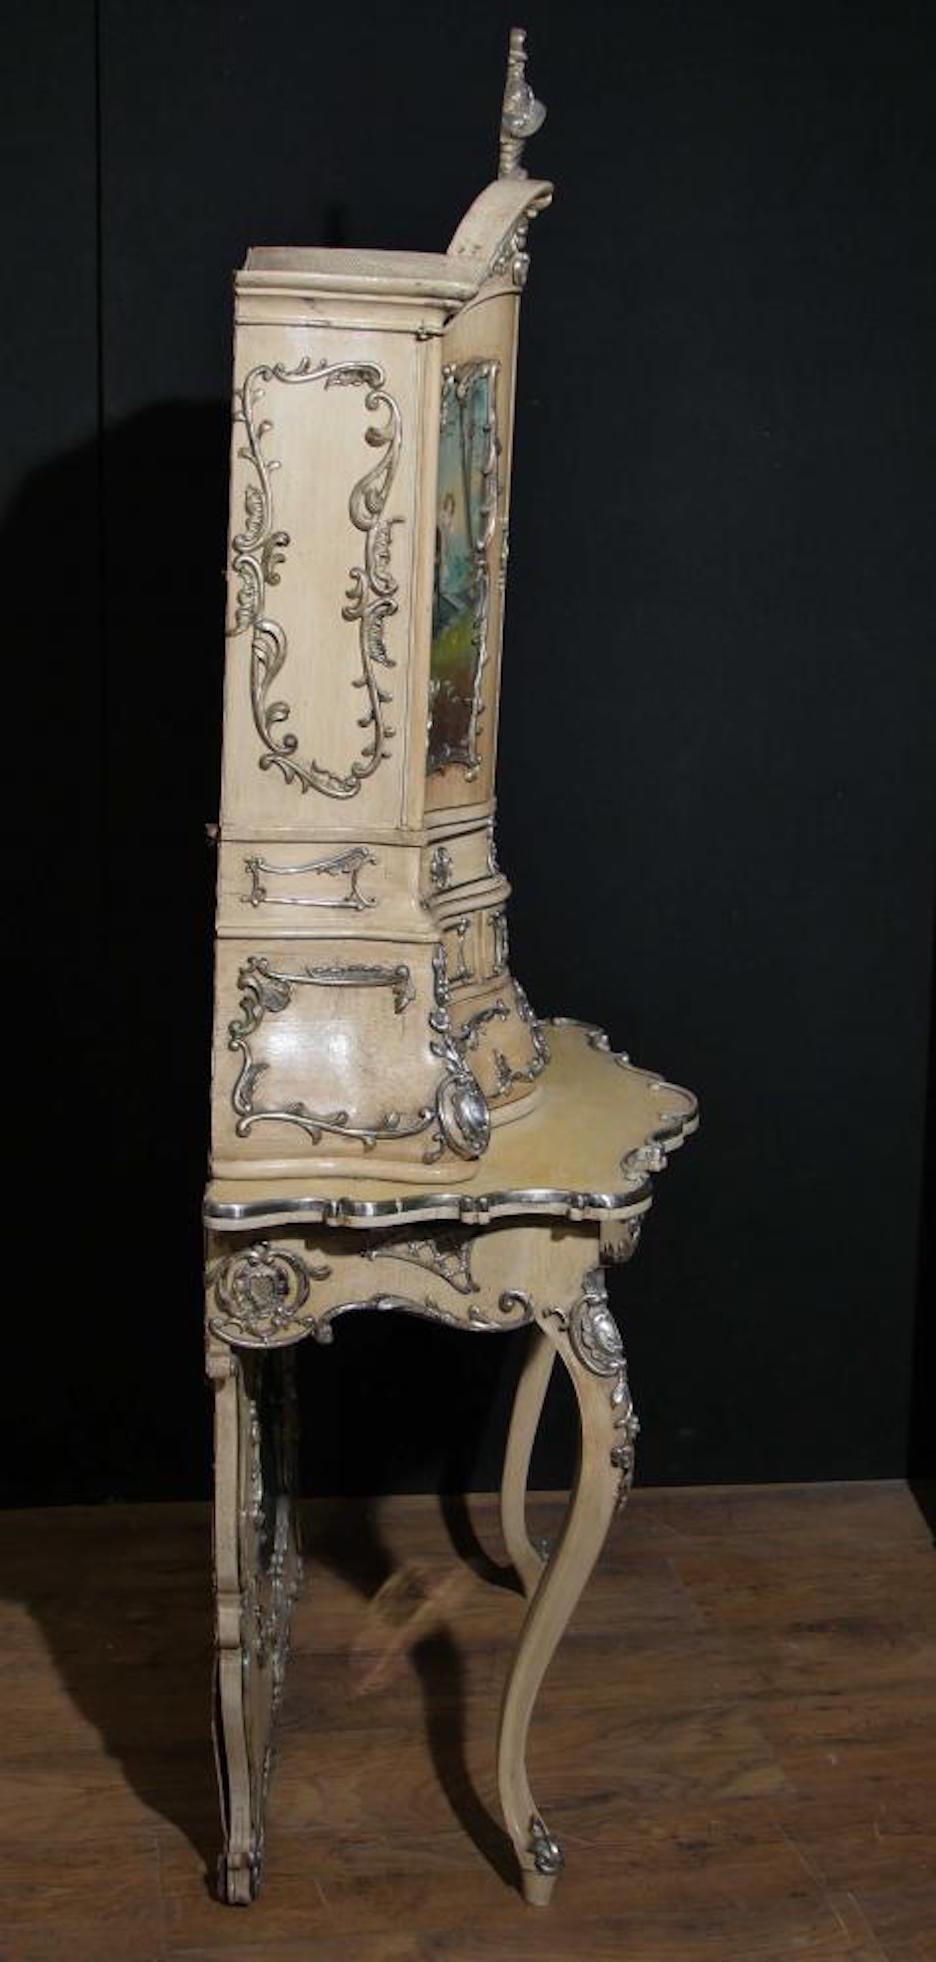 A stunning Italian Florentine cabinet dating to the 1860. Elaborately hand-painted, the decorative panels each have a different romantic scene telling a story.
Profusely adorned with silver plated ormolu mounts with a framed mirror at the base of